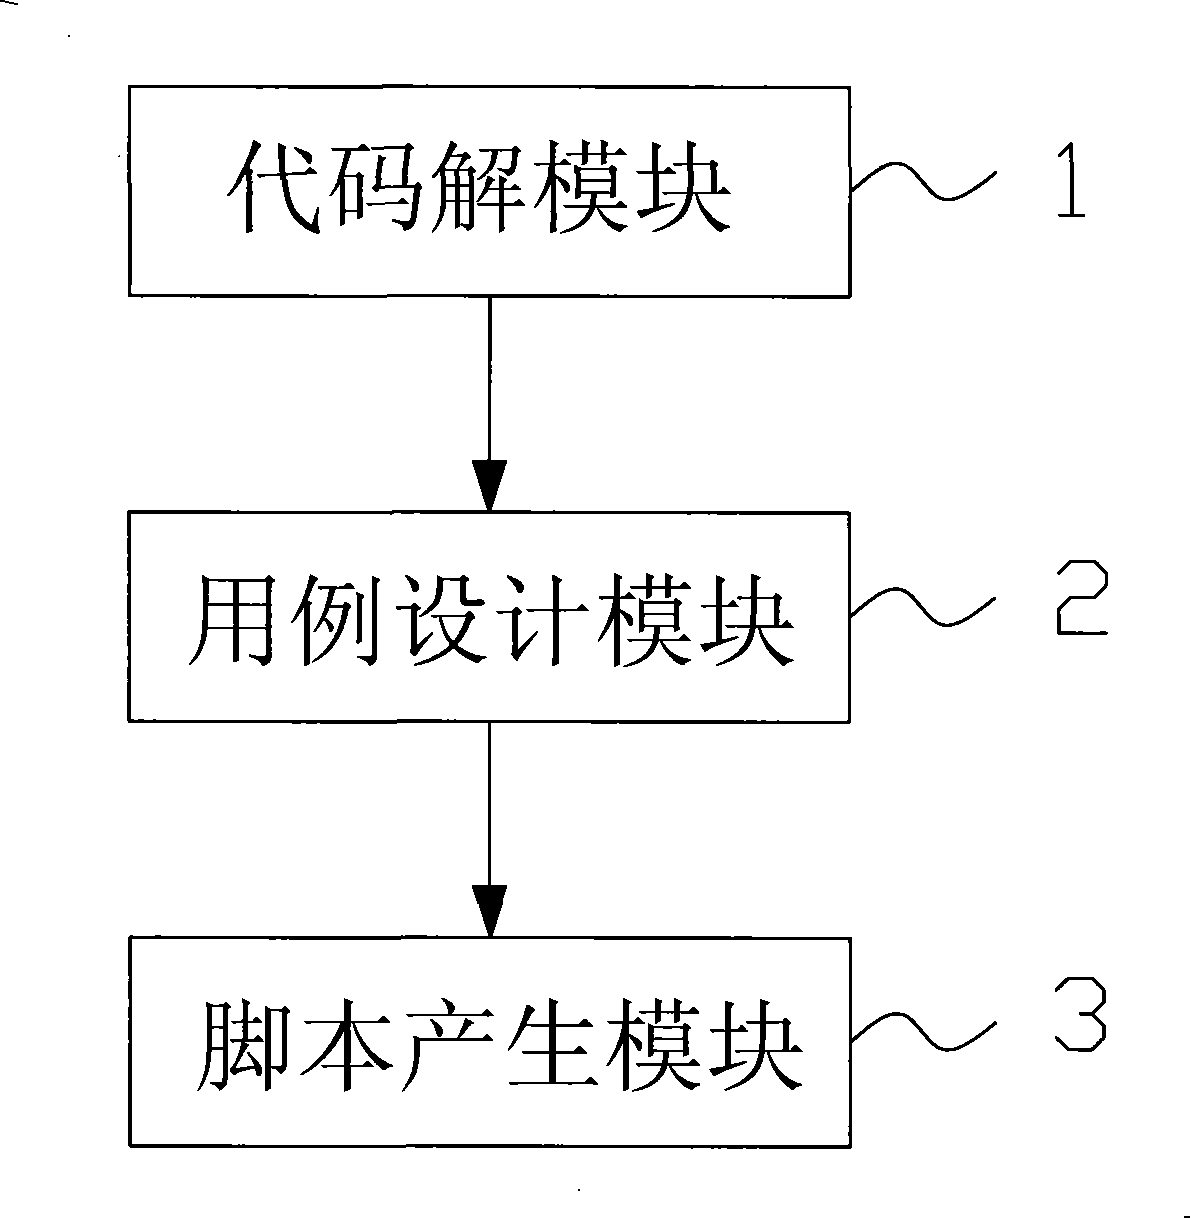 Method for generating and using automatic test script